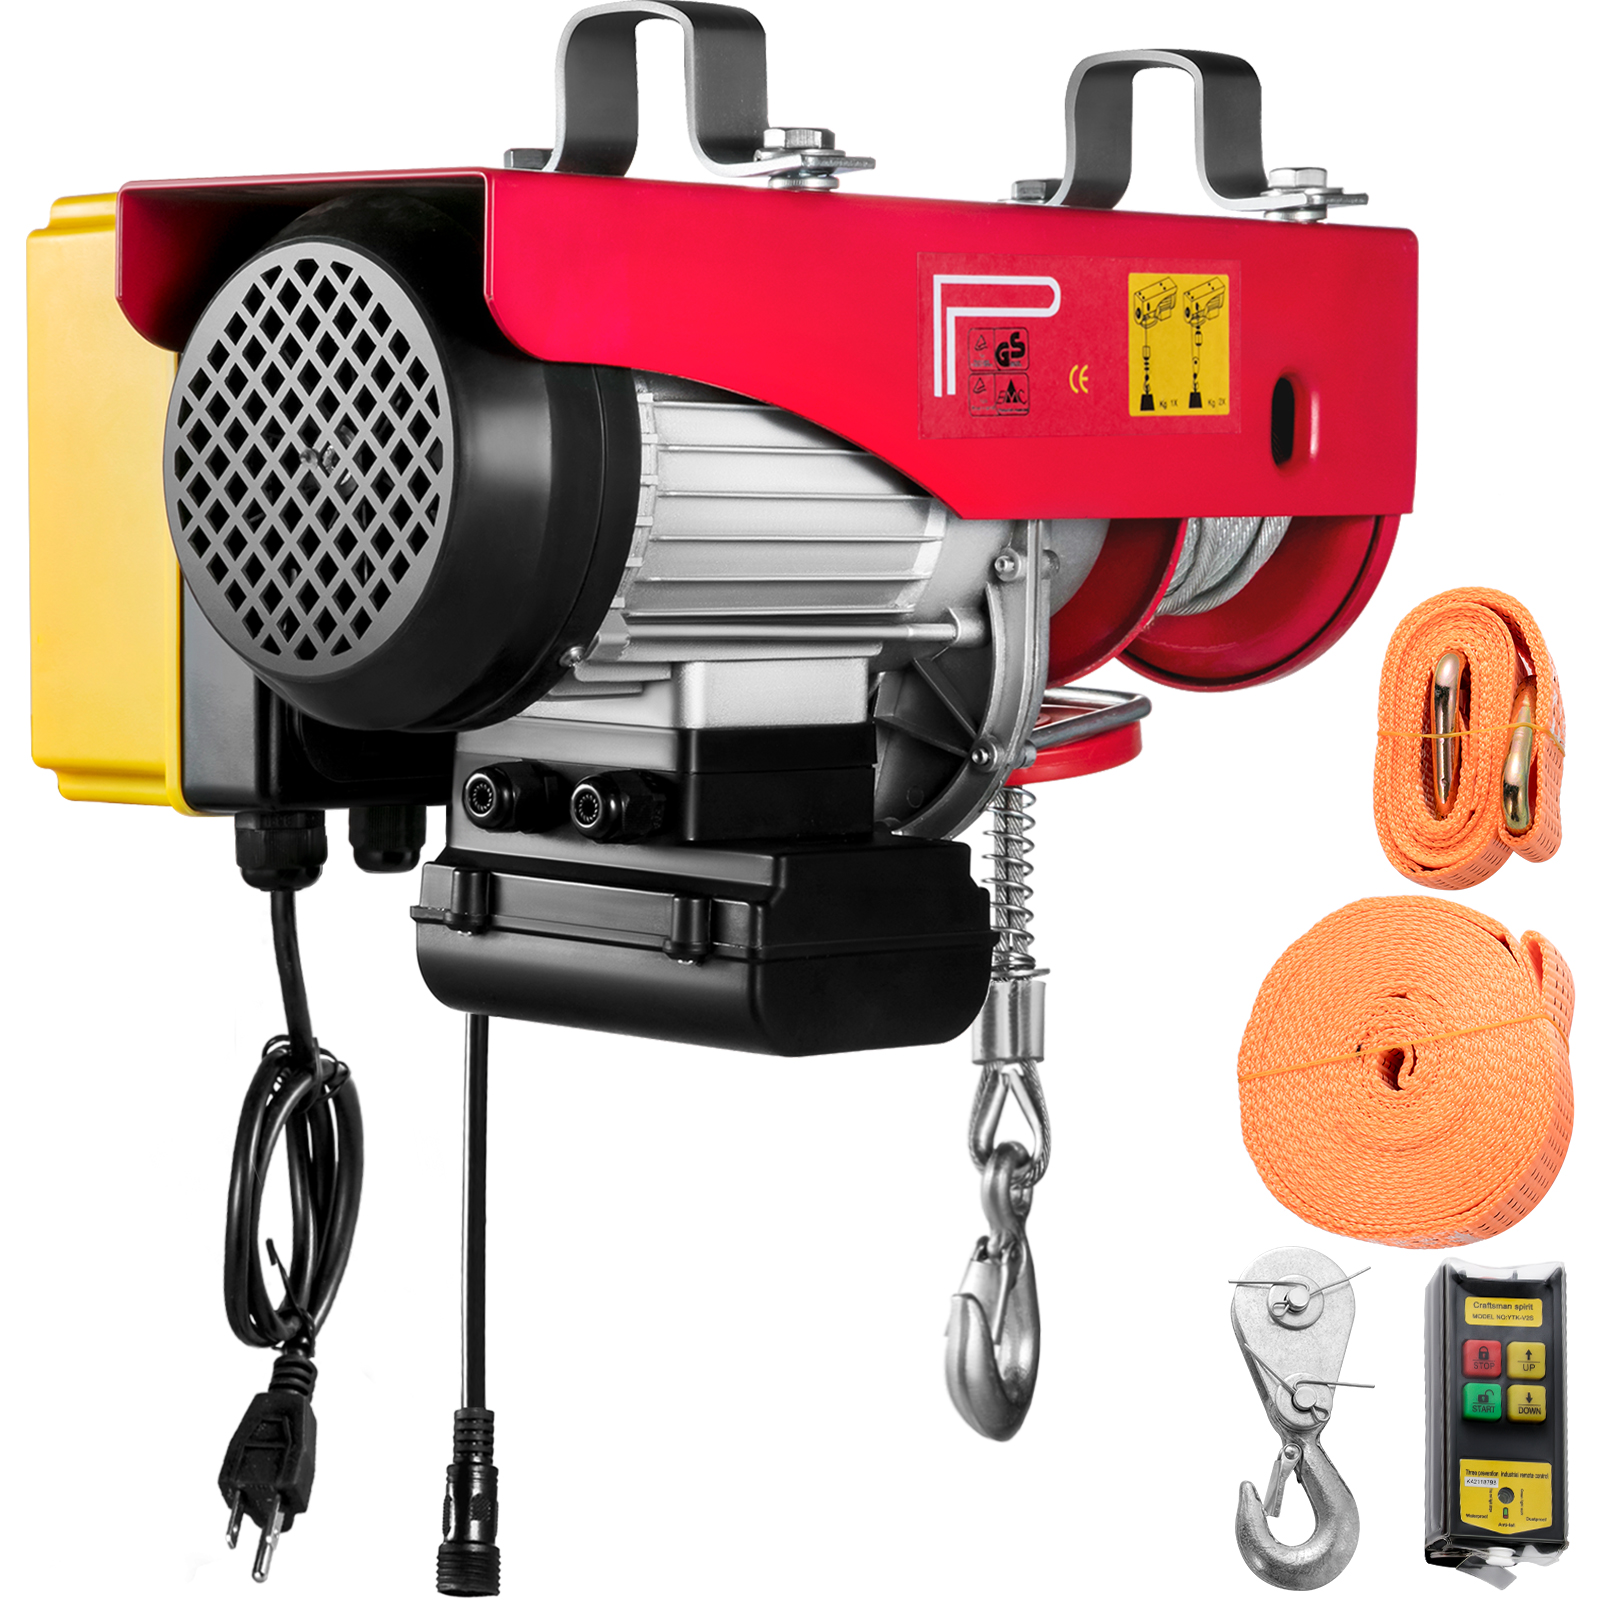 Vevor Electric Hoist 110v Electric Winch 1100lbs With Wireless Remote Control от Vevor Many GEOs